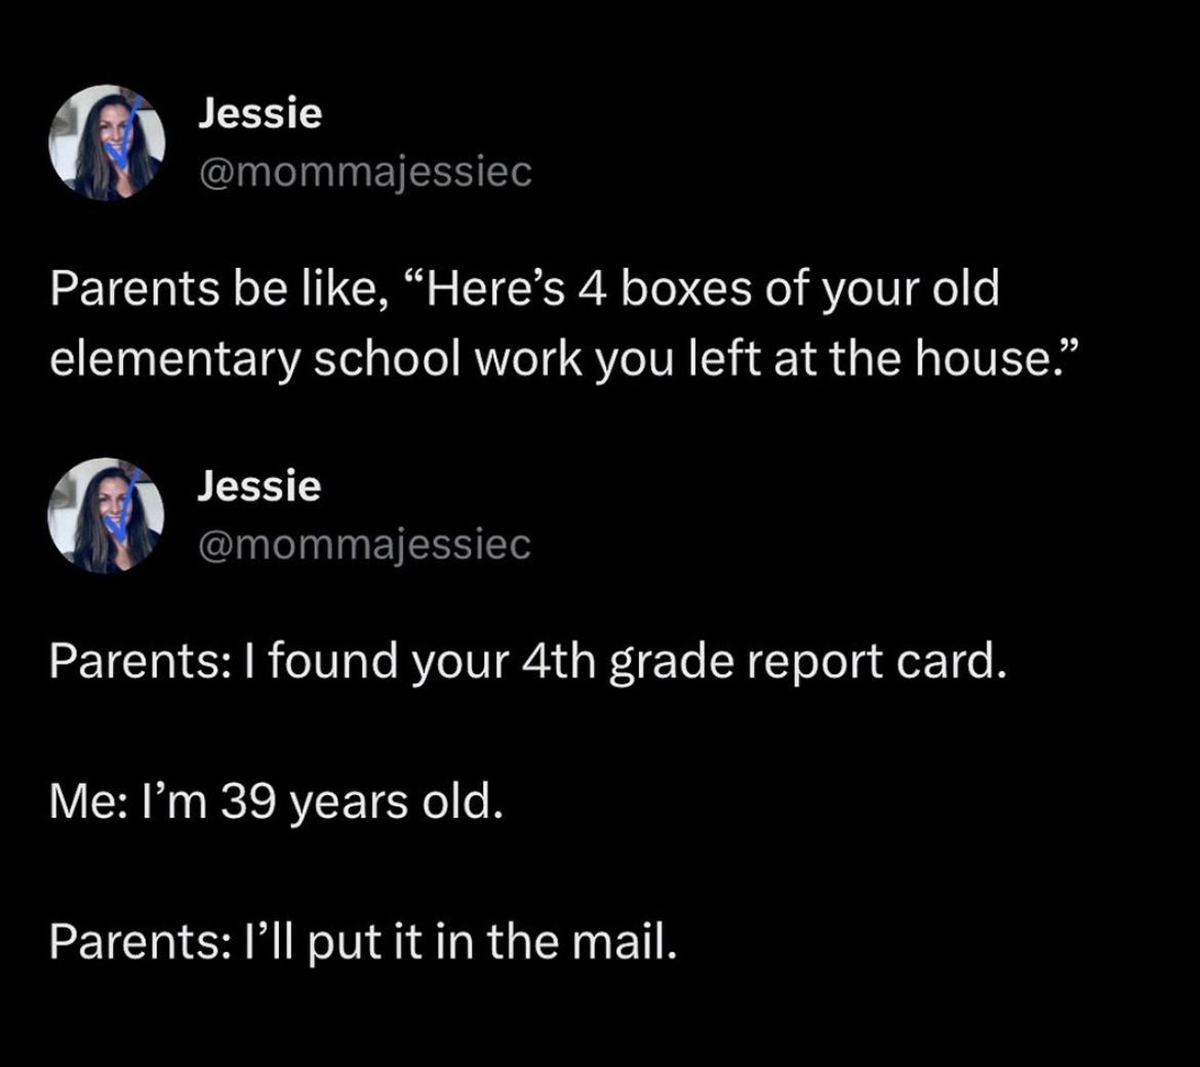 dank memes - screenshot - Jessie Parents be , "Here's 4 boxes of your old elementary school work you left at the house." Jessie Parents I found your 4th grade report card. Me I'm 39 years old. Parents I'll put it in the mail.